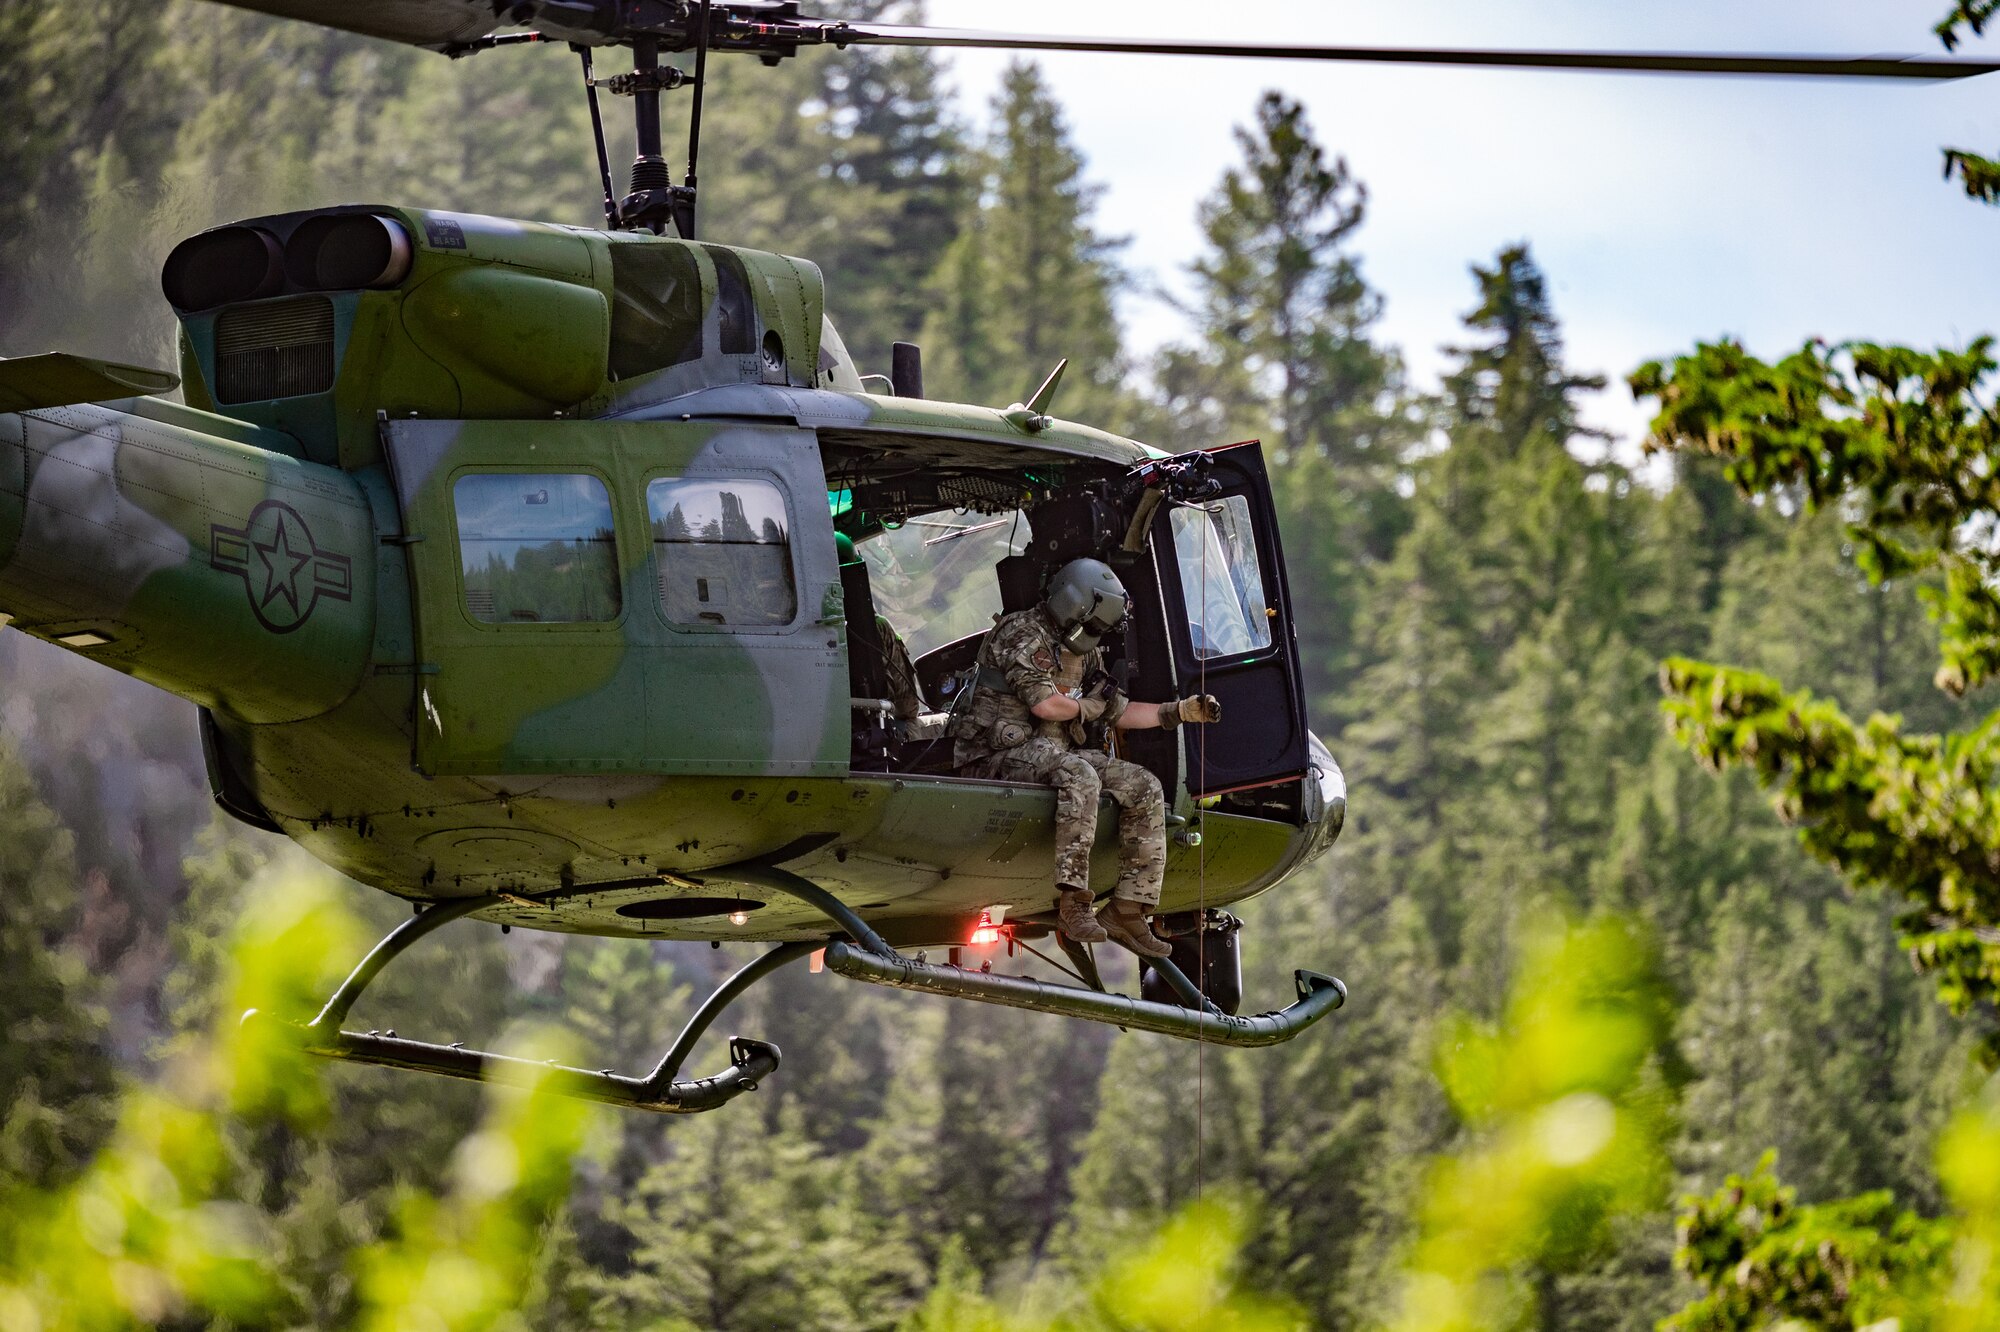 Tech. Sgt. Alex Landers, 40st Helicopter Squadron flight engineer, lowers the flight doctor out of an UH-N1 Huey during a search and rescue exercise August 3, 2022, in Sluice Boxes State Park.